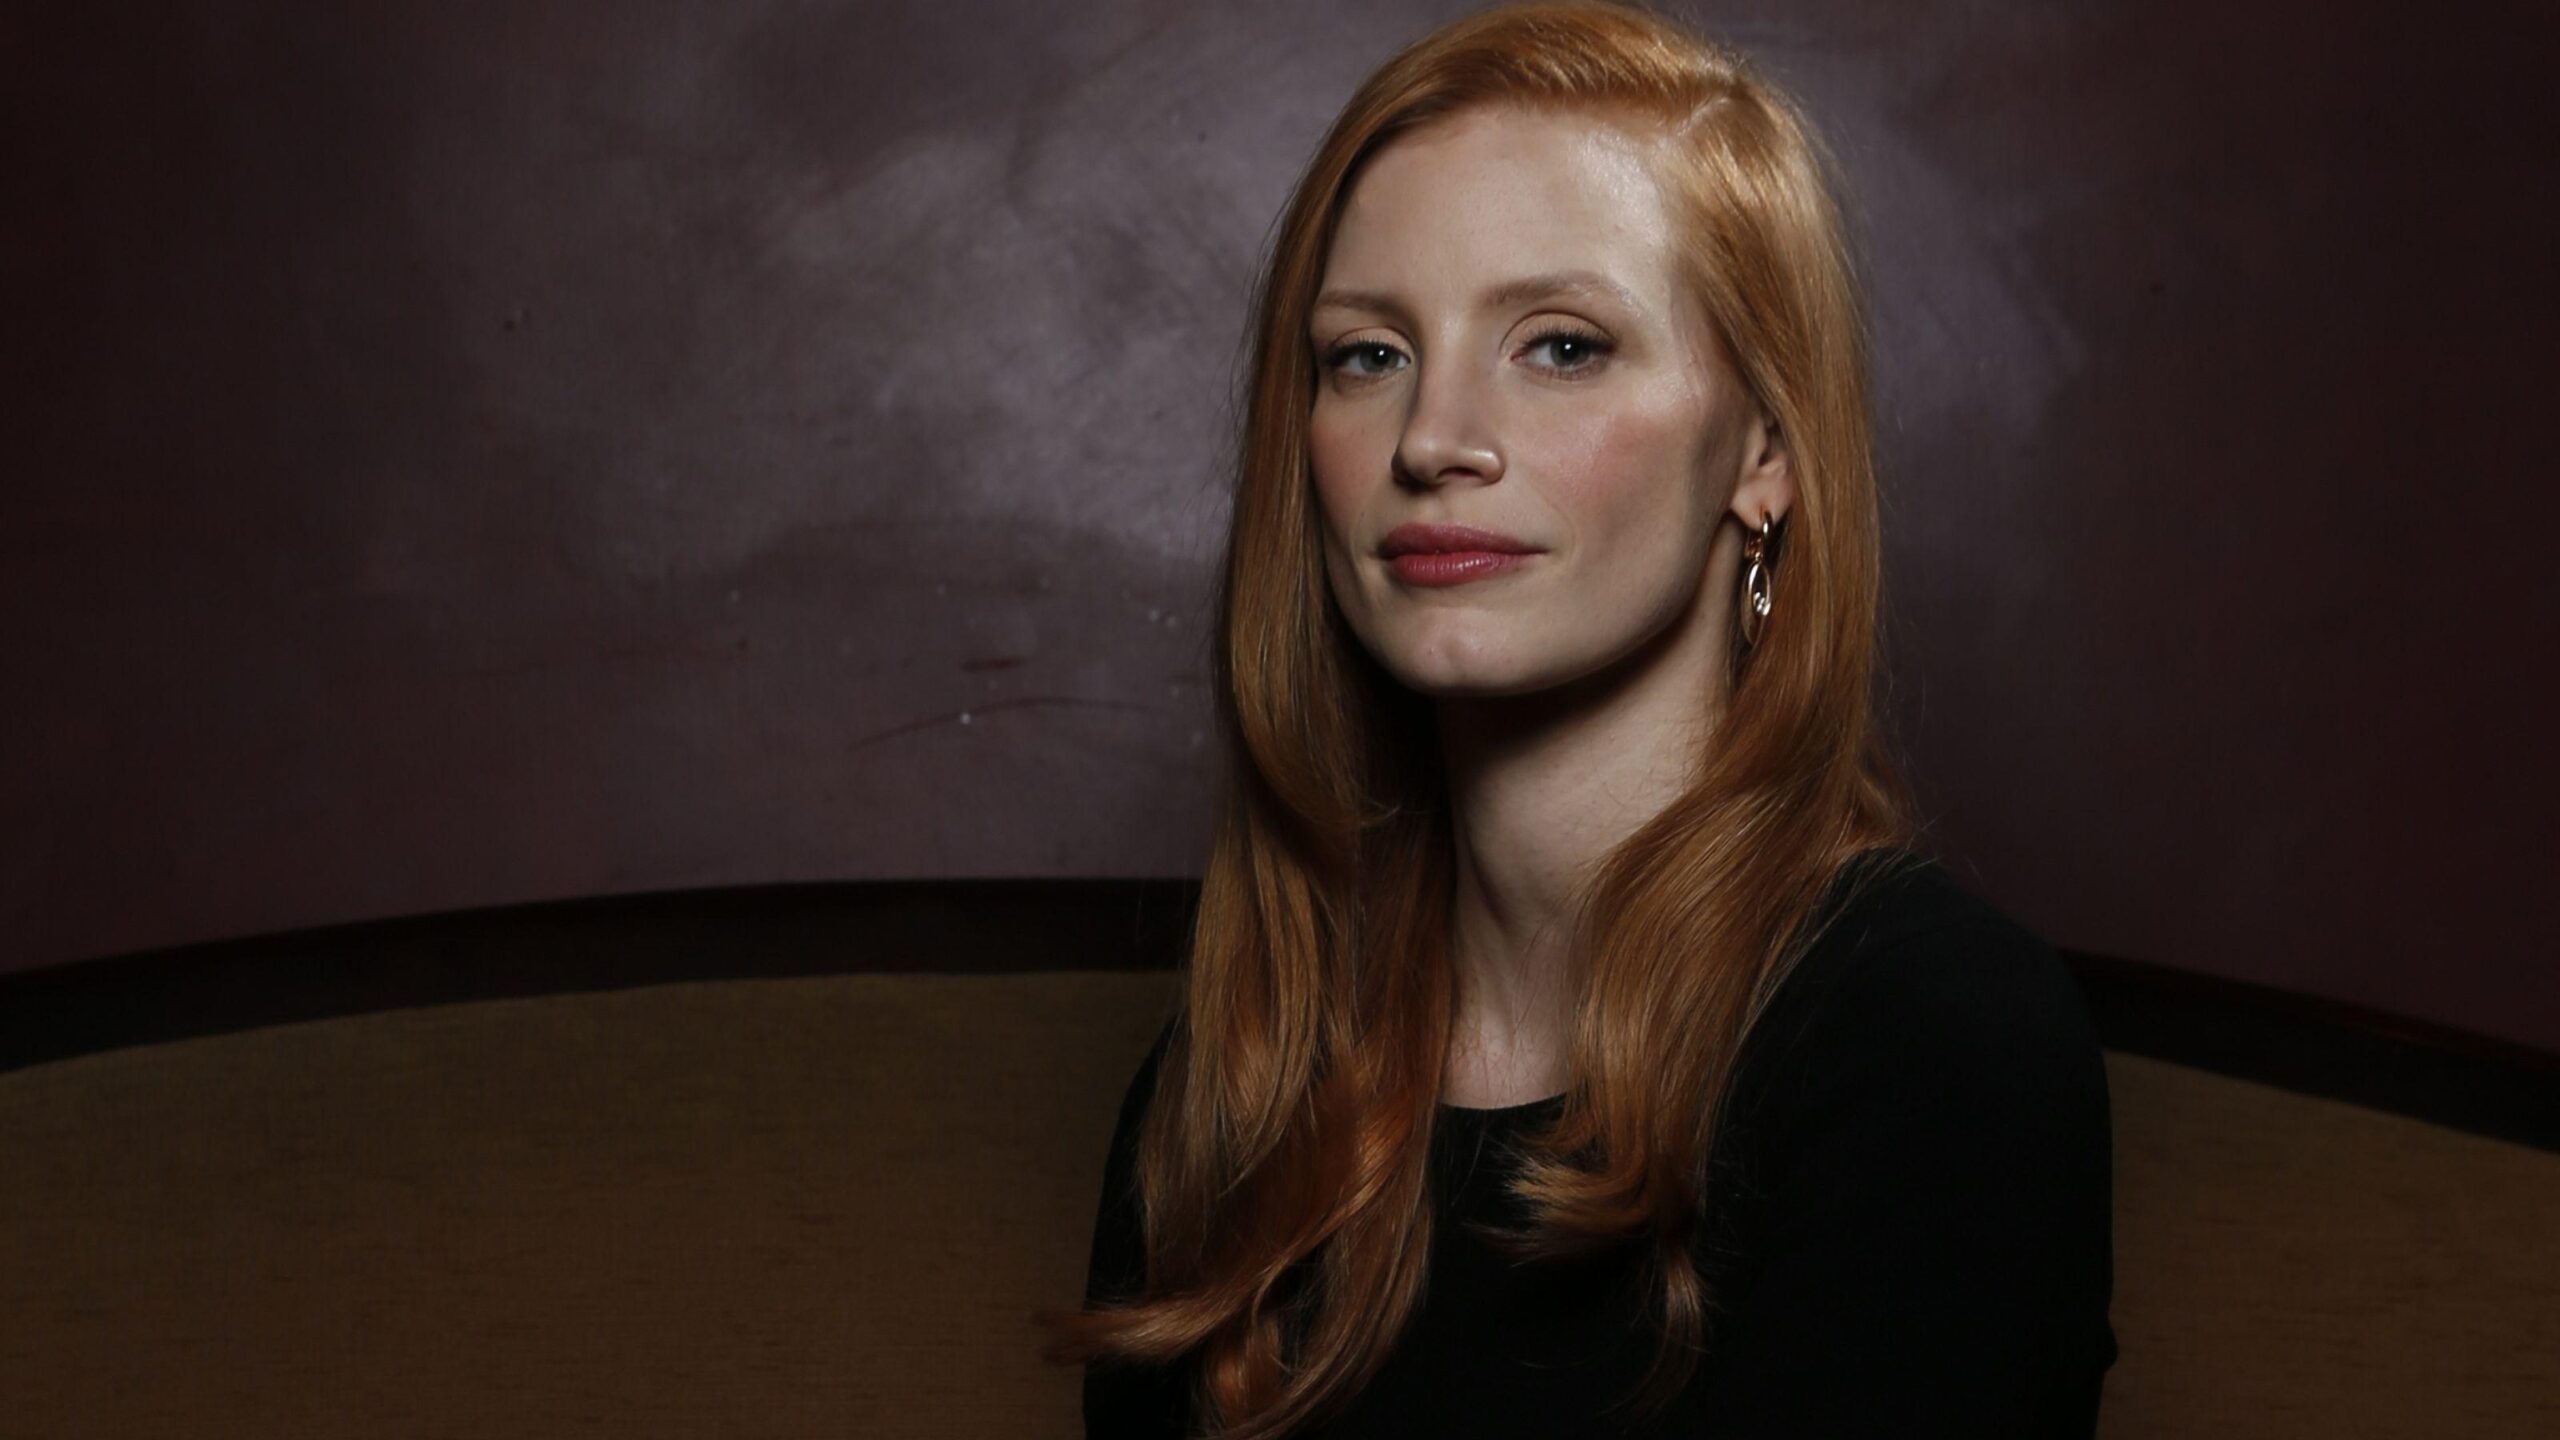 Jessica Chastain Wallpapers Image 7193